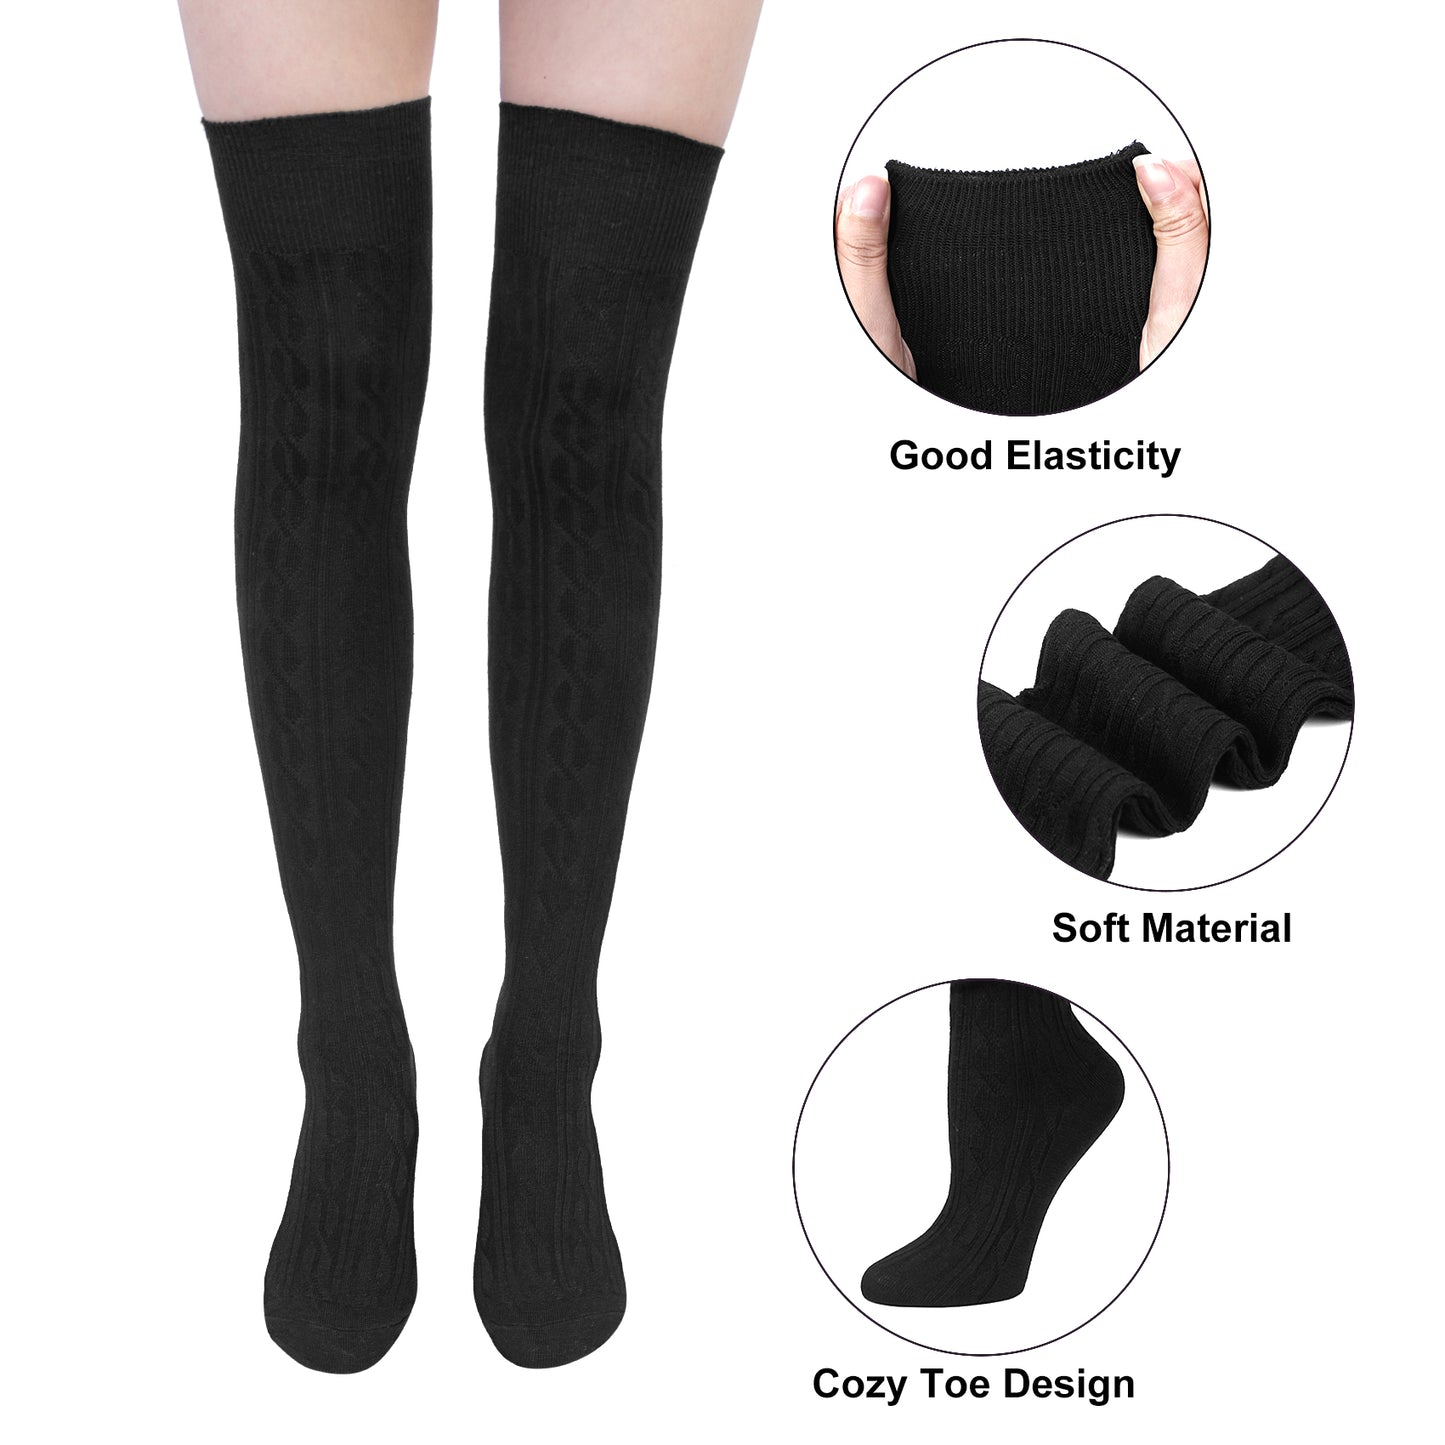 Loritta 4 Pairs Thigh High Socks for Women Cotton Long Over the Knee Socks